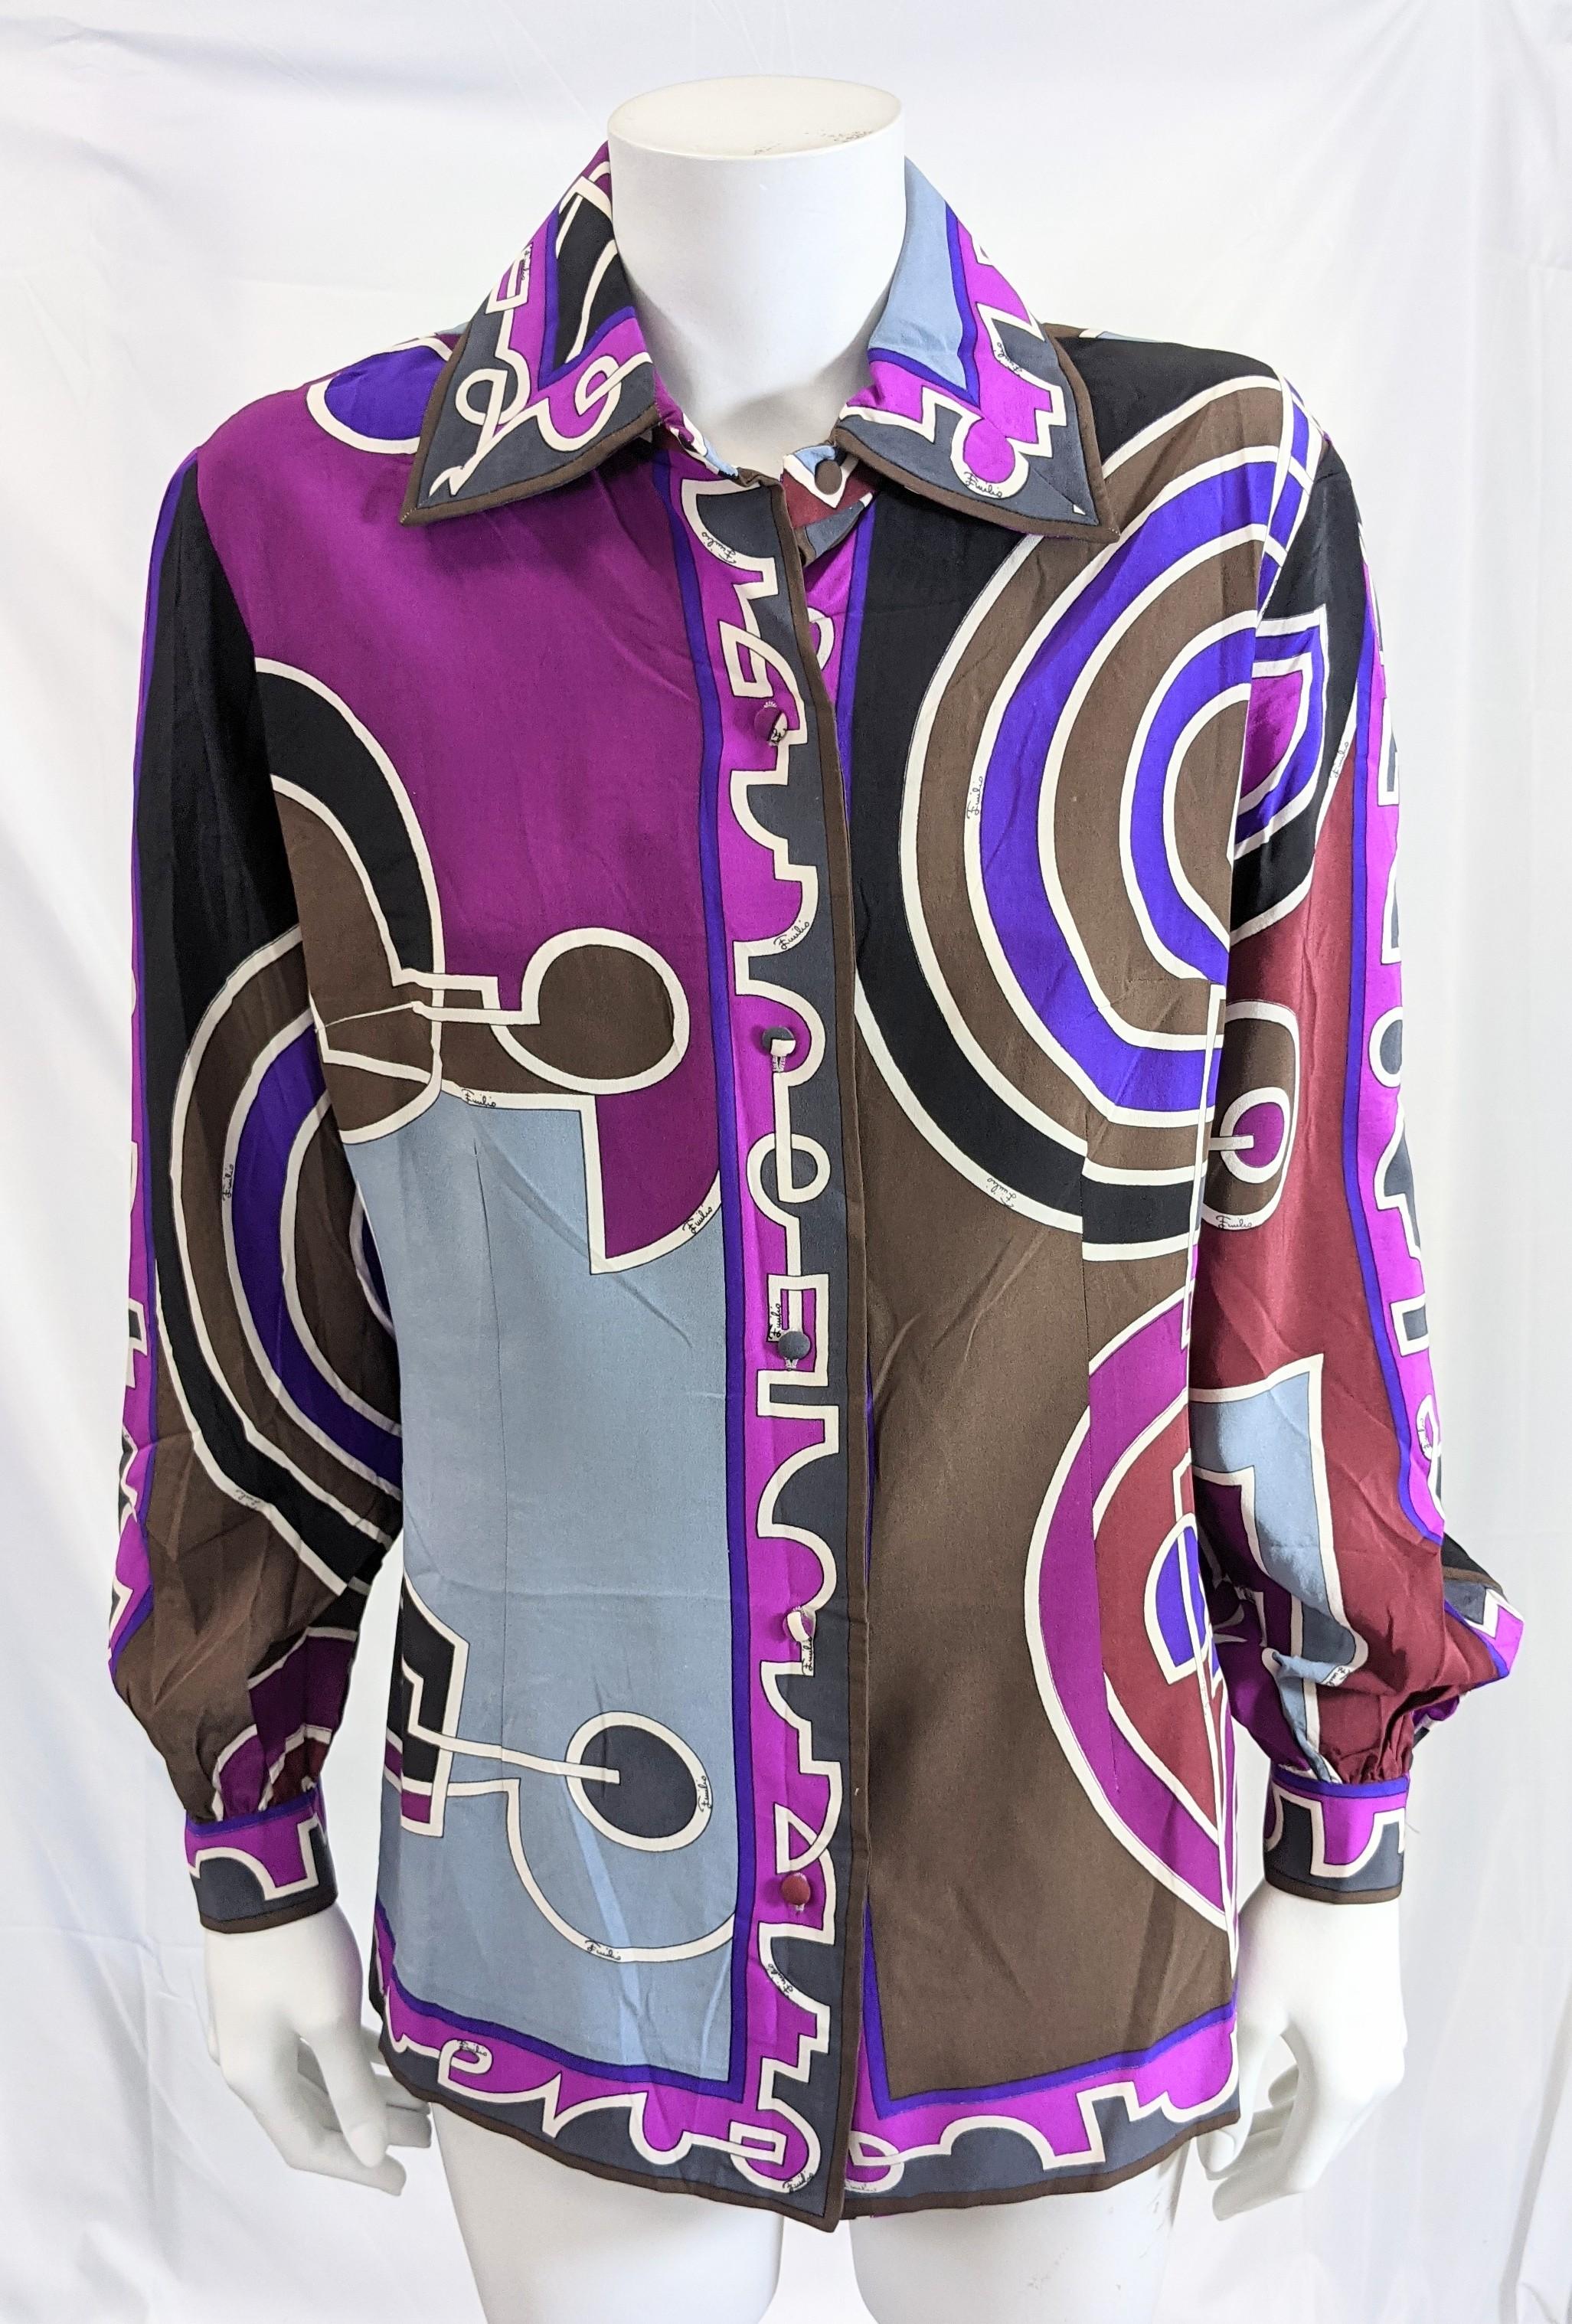 Striking Vintage Emilio Pucci Silk Crepe Shirt from the 1960's. Vibrant graphics in tones of purple and brown. Full collar, covered silk buttons on placket and full gathered sleeves. Vintage size 12, Modern 8-10.